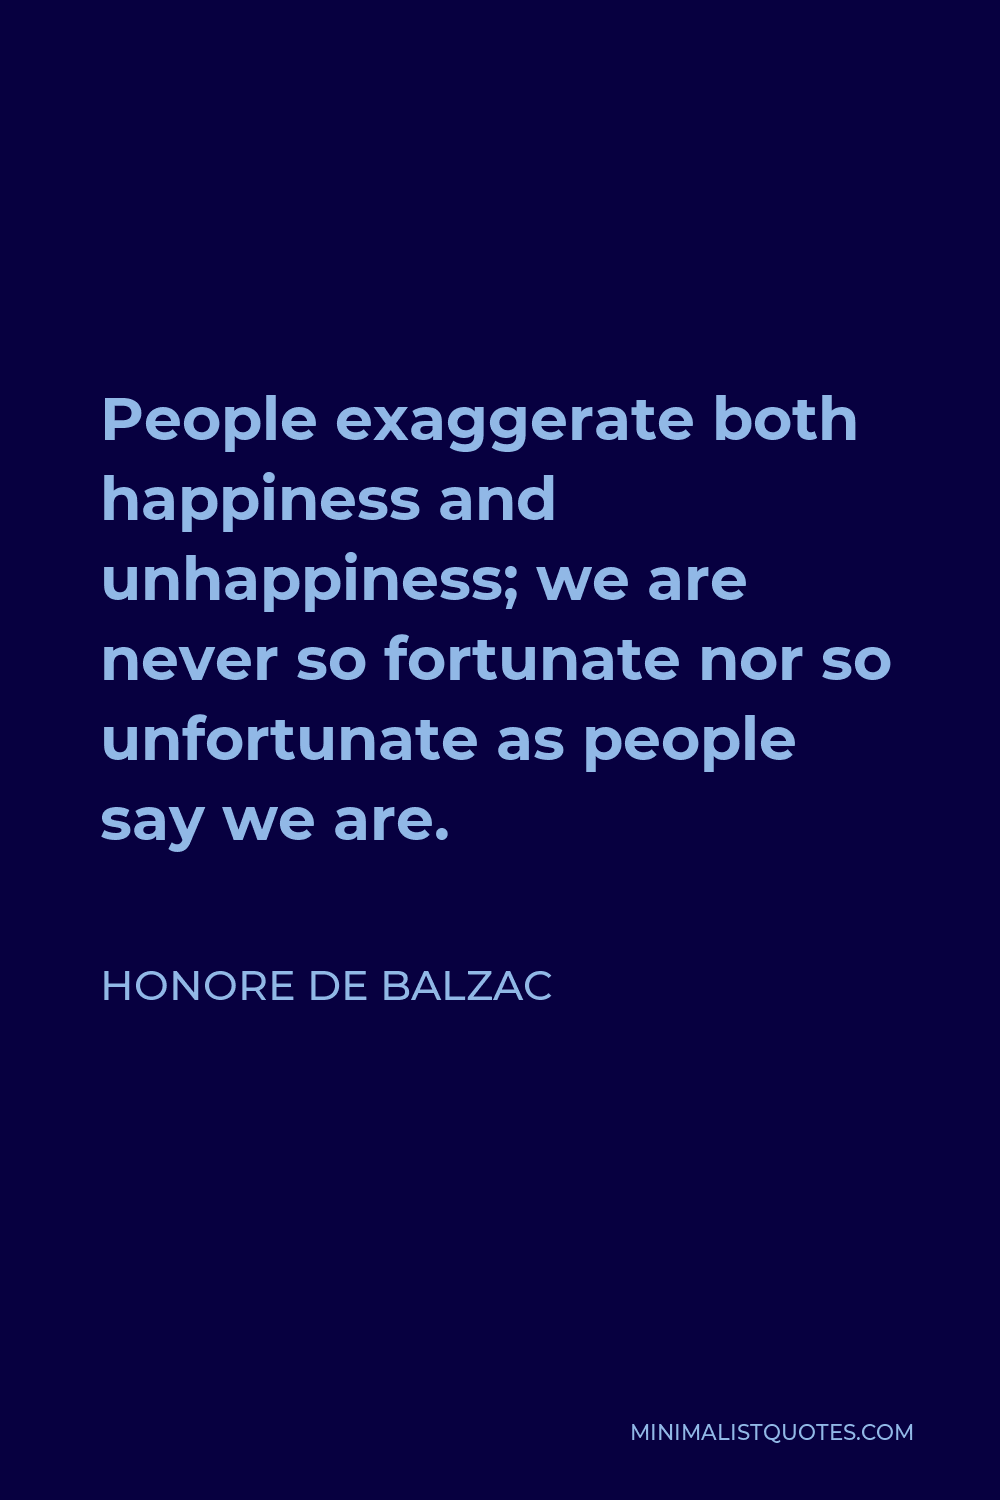 Honore de Balzac Quote - People exaggerate both happiness and unhappiness; we are never so fortunate nor so unfortunate as people say we are.